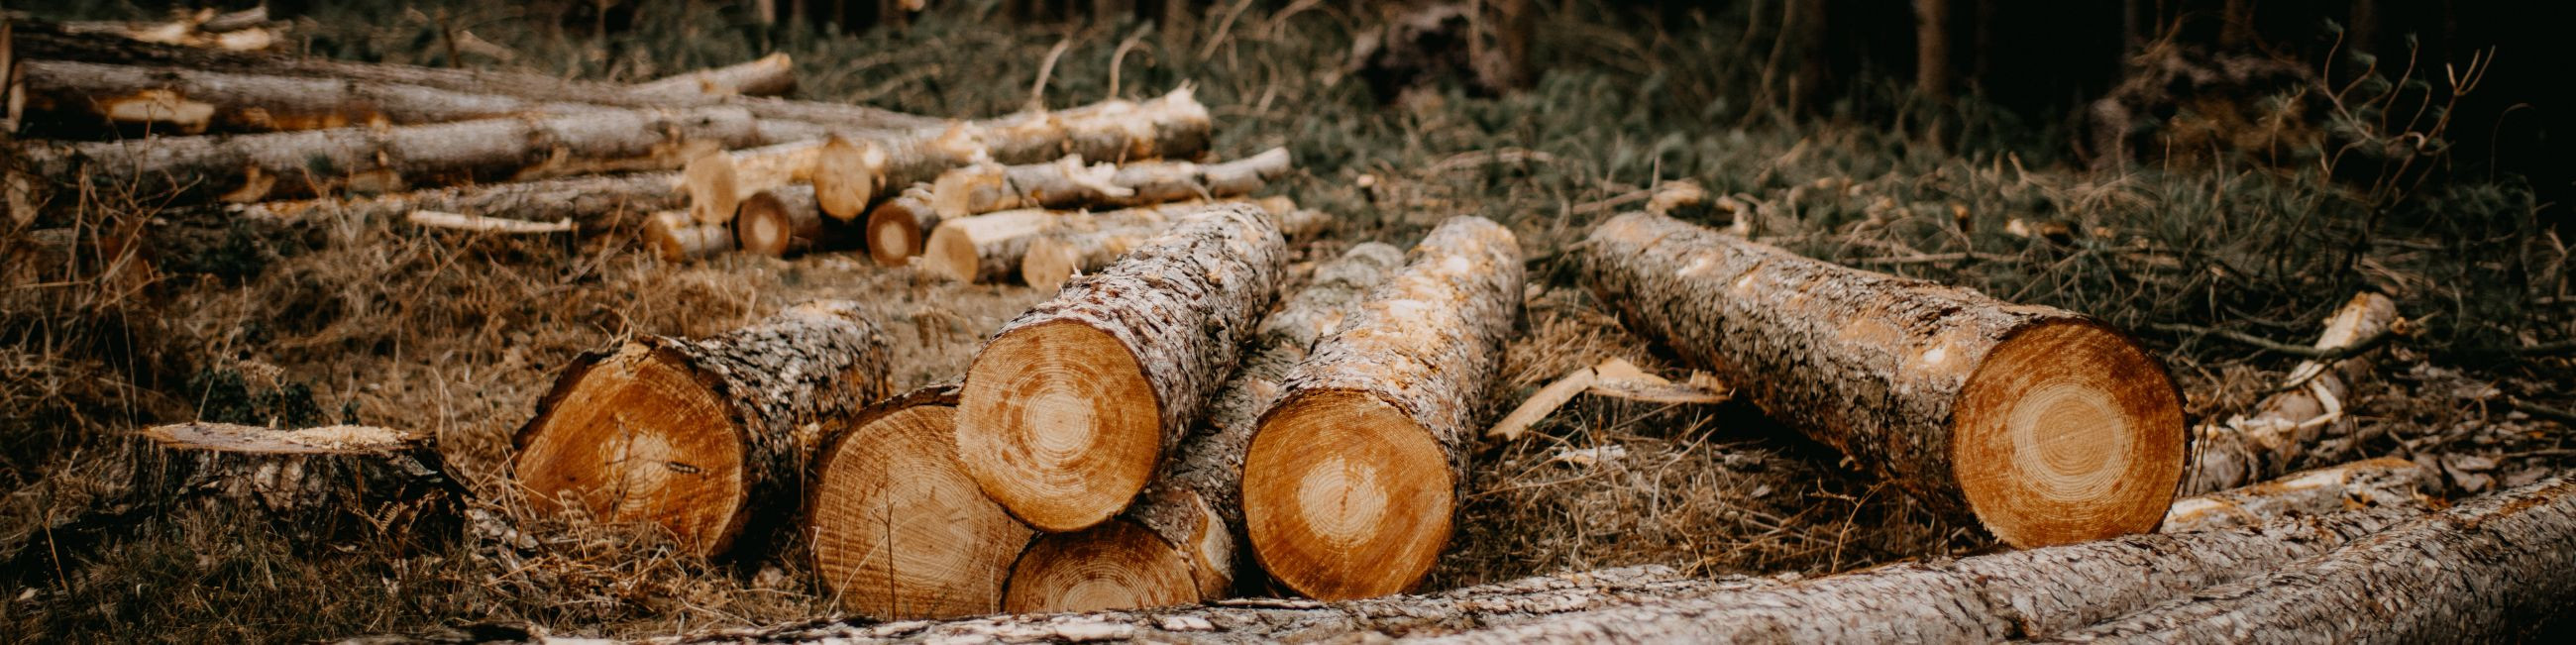 heating materials, logging, purchase of forest land, forest estates, firewood for fireplace, oven trees, firewood for sale, purchase of forest properties, Purchase of timber, tipper transport